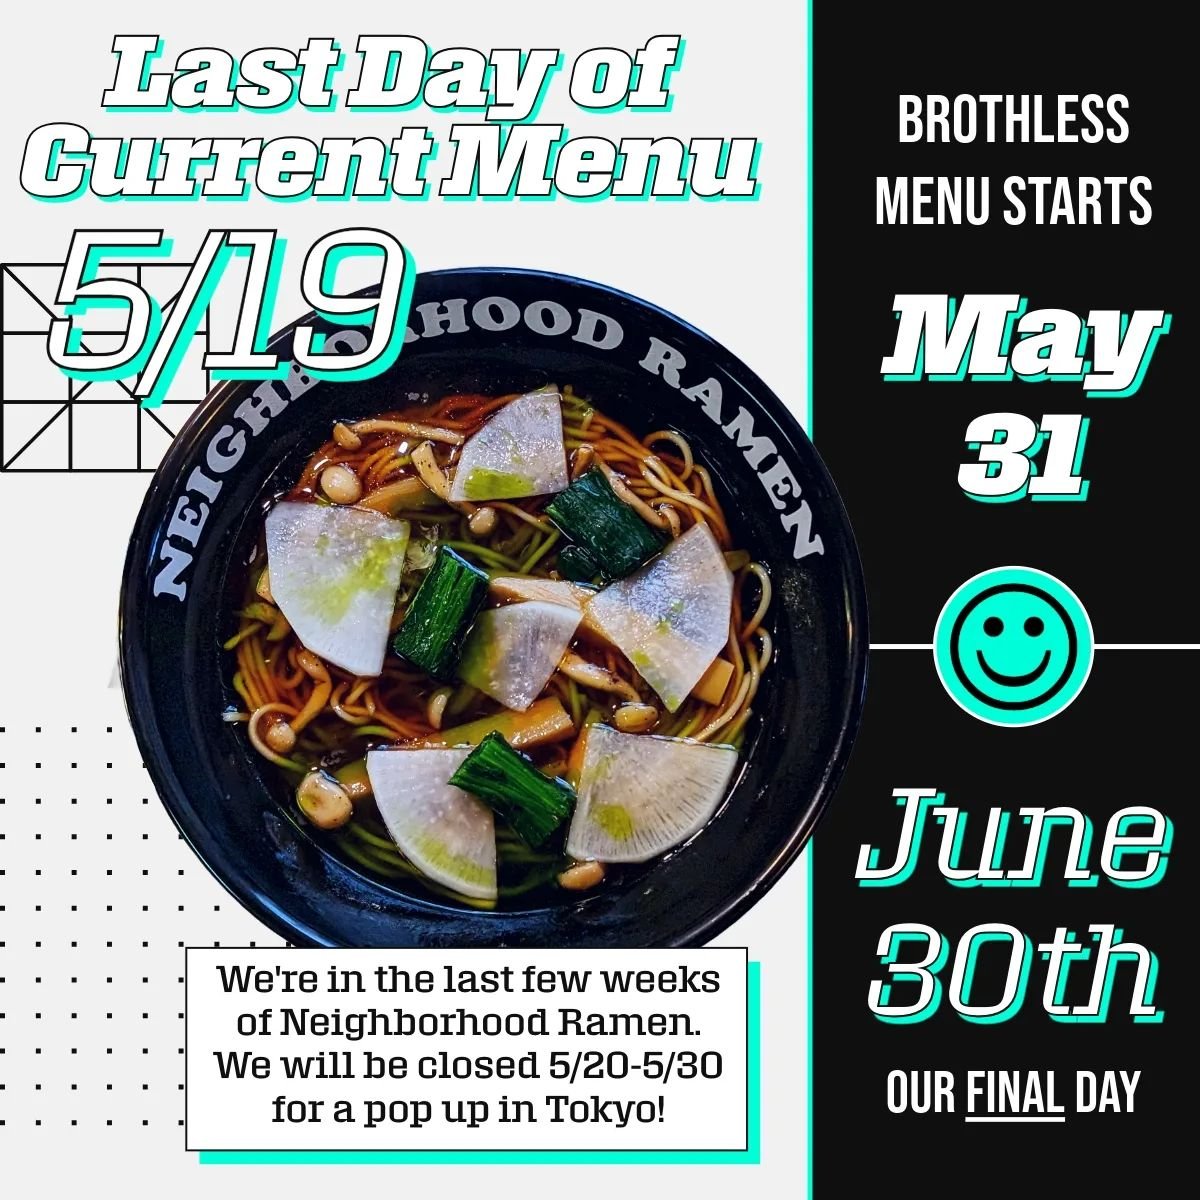 Time is flying! We will be closed the week of Memorial Day to do a collaboration pop up in Tokyo!
So really, there's only 6 weeks left of NEIGHBORHOOD. 
That's 25 open days left!

The current soup menu will go until 5/19 and then we will reopen on 5/